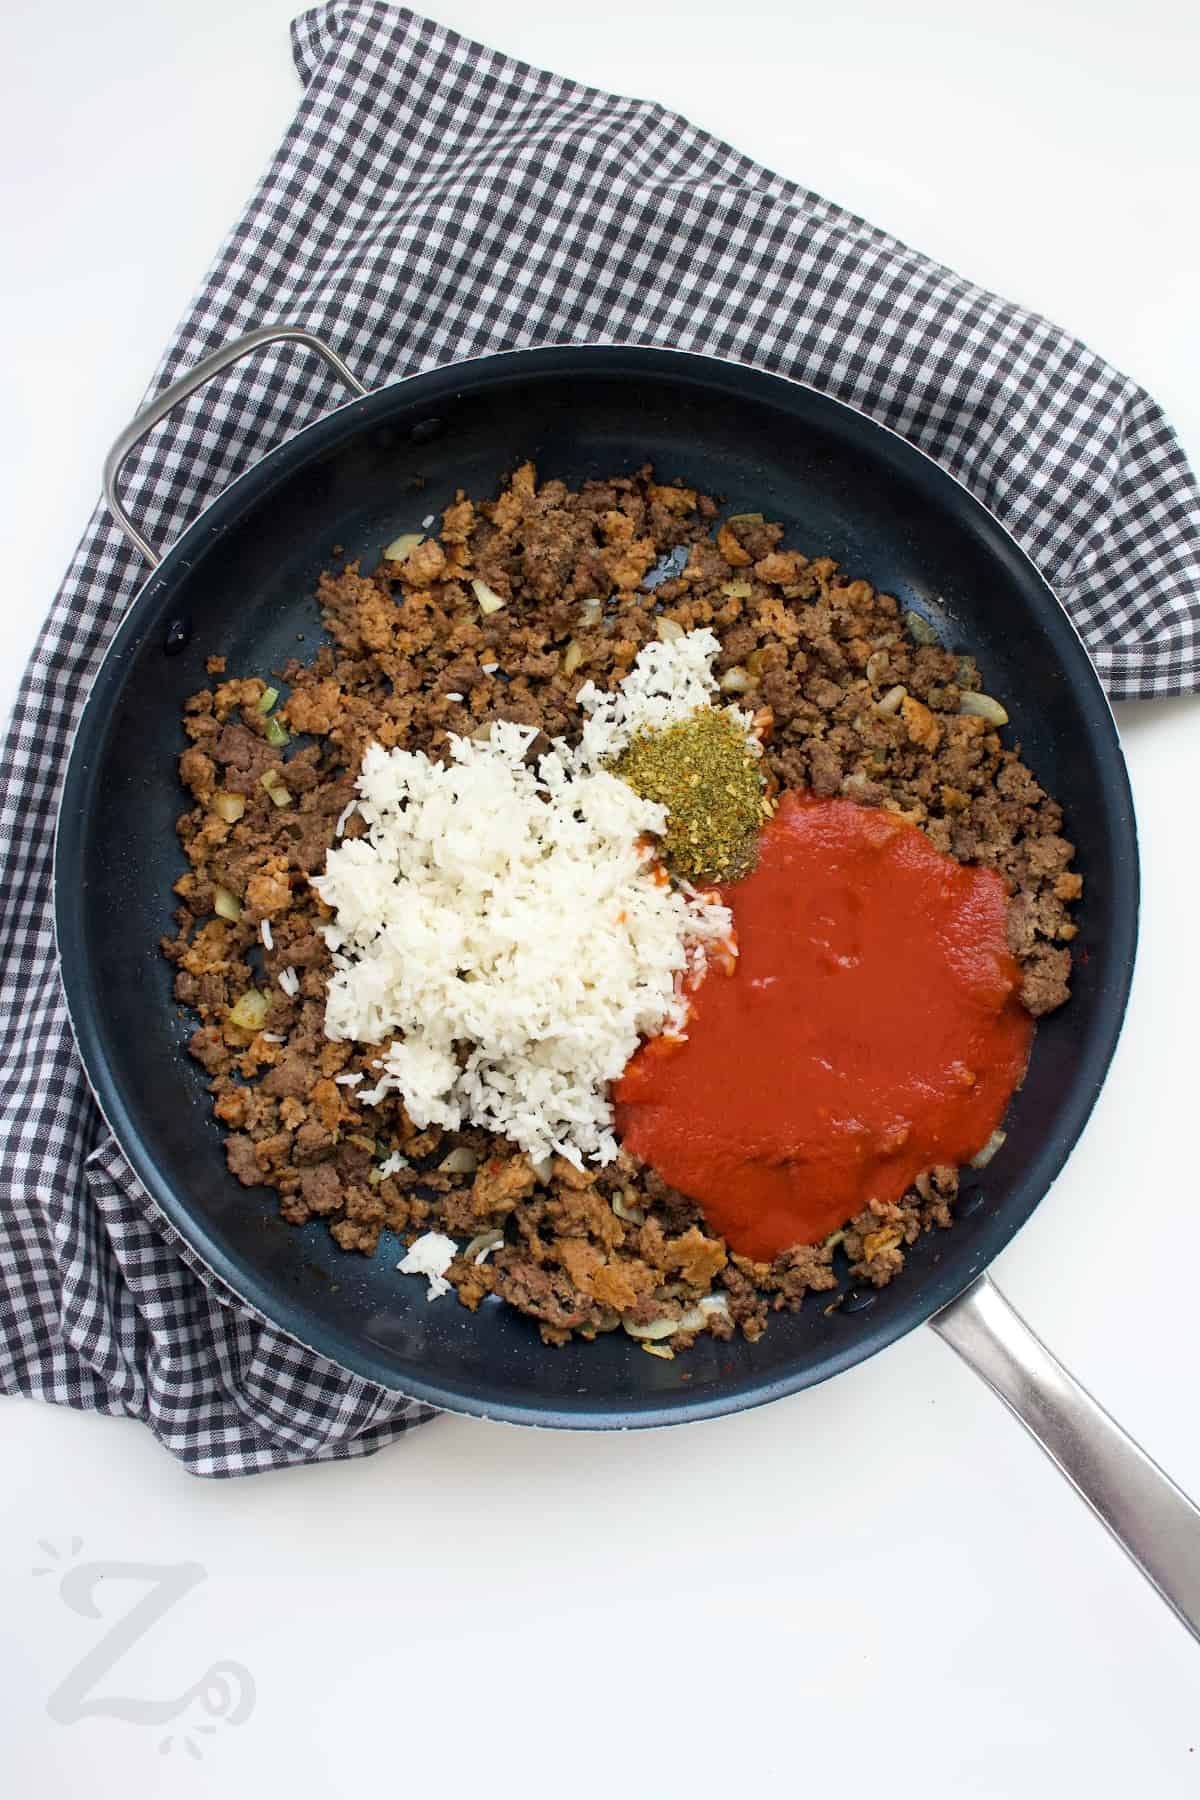 ground turkey and sausage, rice, tomato sauce and seasoning in a skillet to make slow cooker stuffed peppers